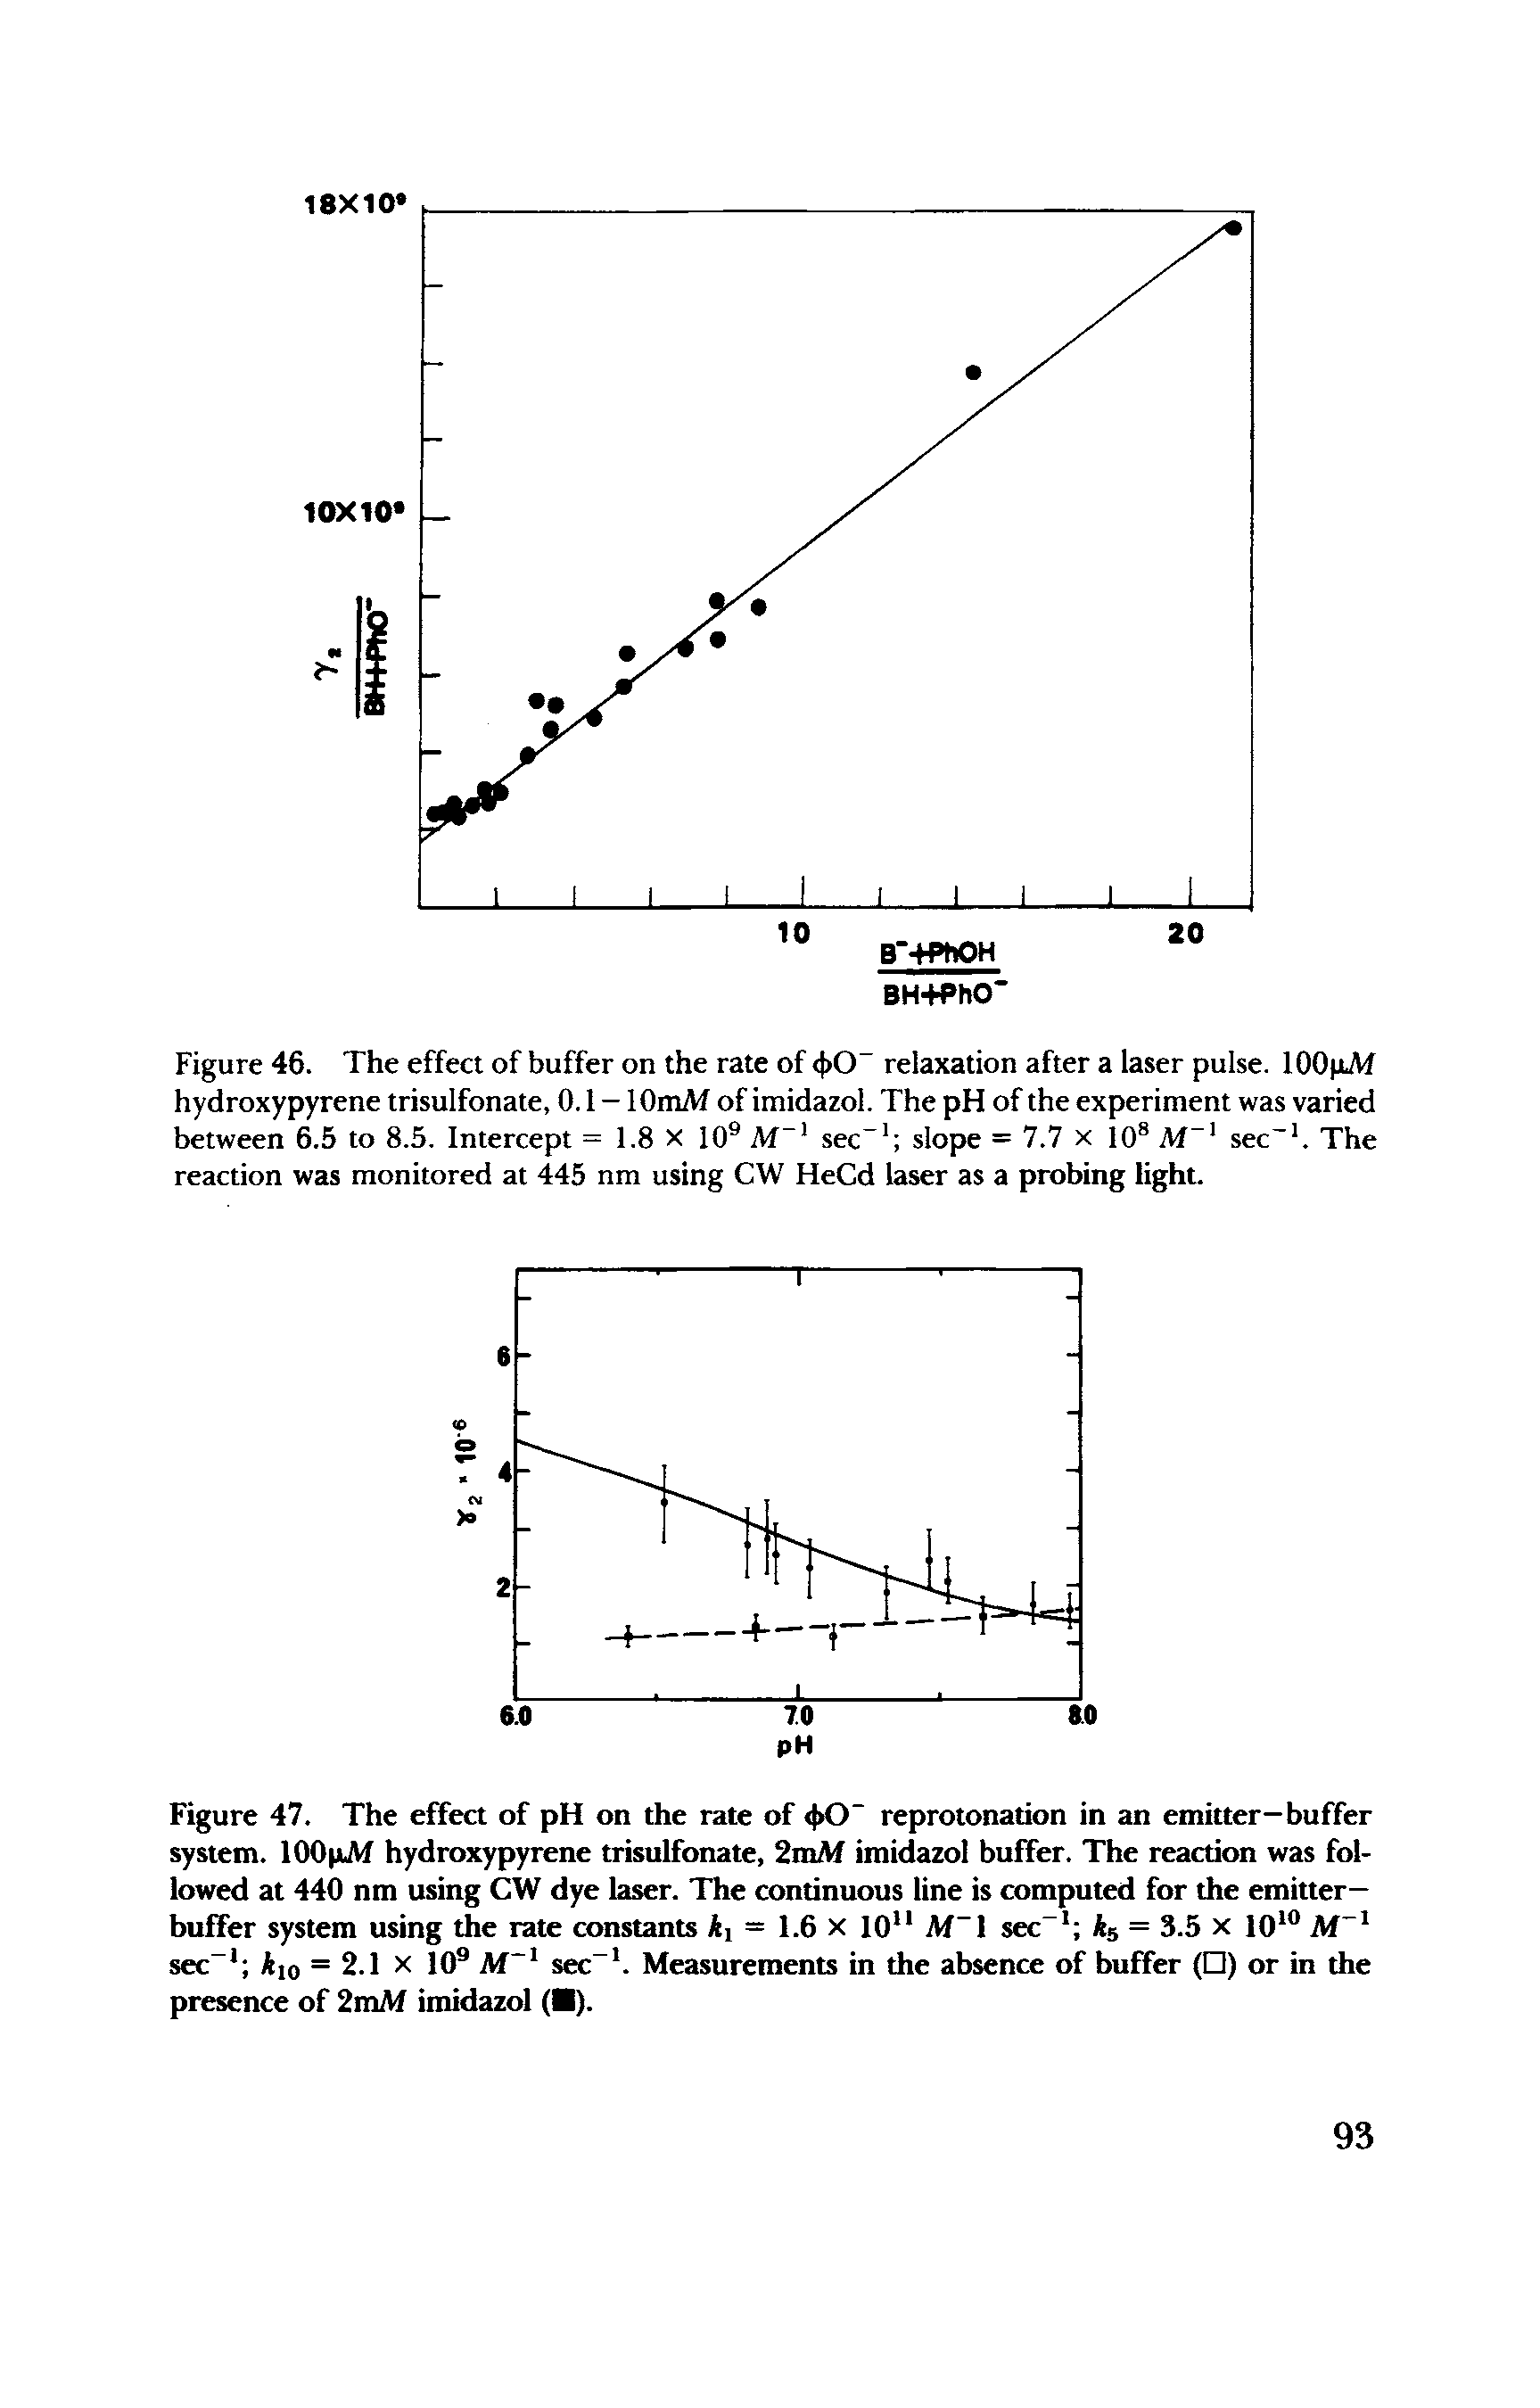 Figure 47. The effect of pH on the rate of < >0- reprotonation in an emitter—buffer system. lOOpJVf hydroxypyrene trisulfonate, 2mM imidazol buffer. The reaction was followed at 440 nm using CW dye laser. The continuous line is computed for the emitter-buffer system using the rate constants ki = 1.6 x 10u M sec-1 A5 = 3.5 x 1010 Af-1 sec-1 io = 2.1 x 109 AT-1 sec-1. Measurements in the absence of buffer ( ) or in the presence of 2mM imidazol ( ).